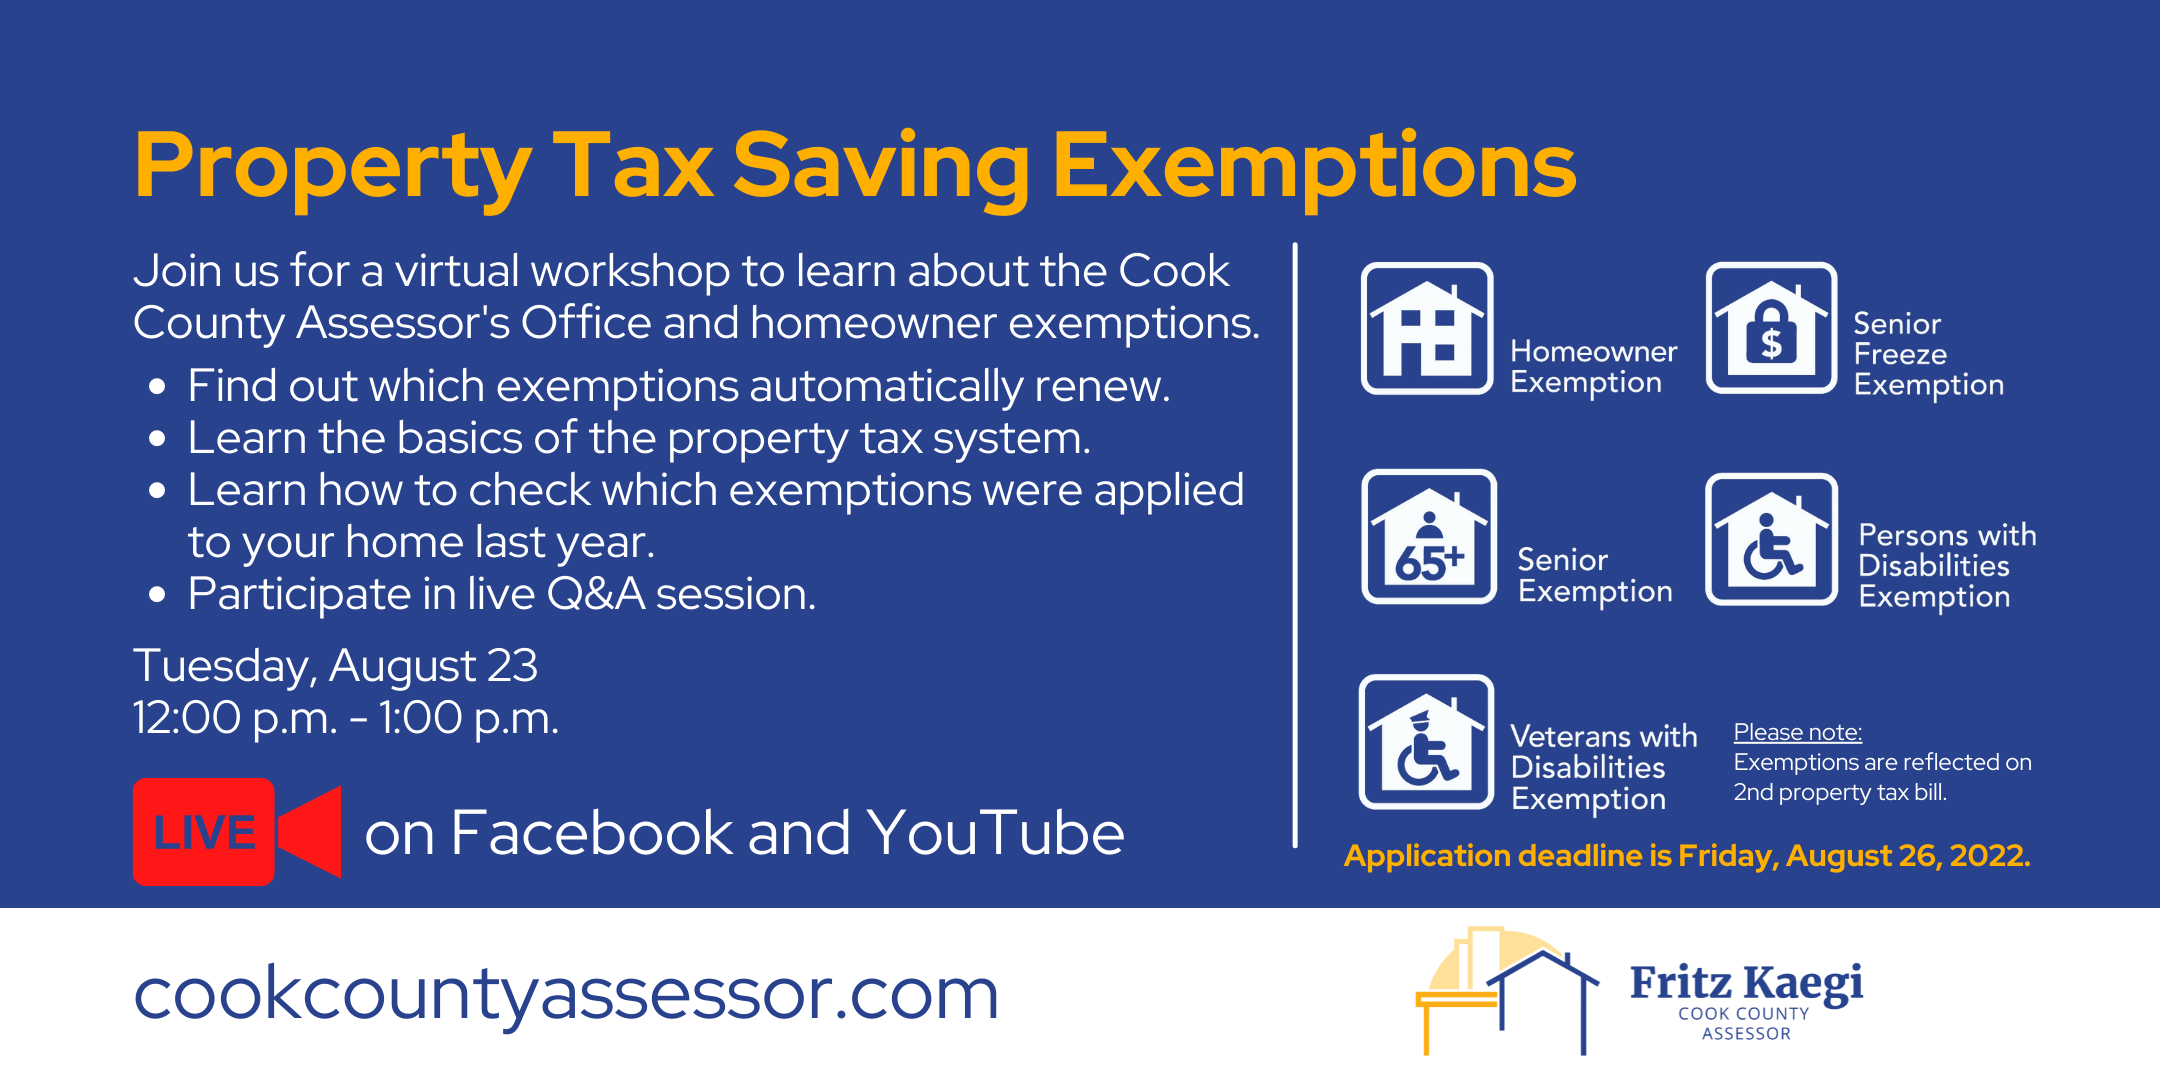 Property Tax Exemption Workshop Tuesday August 23